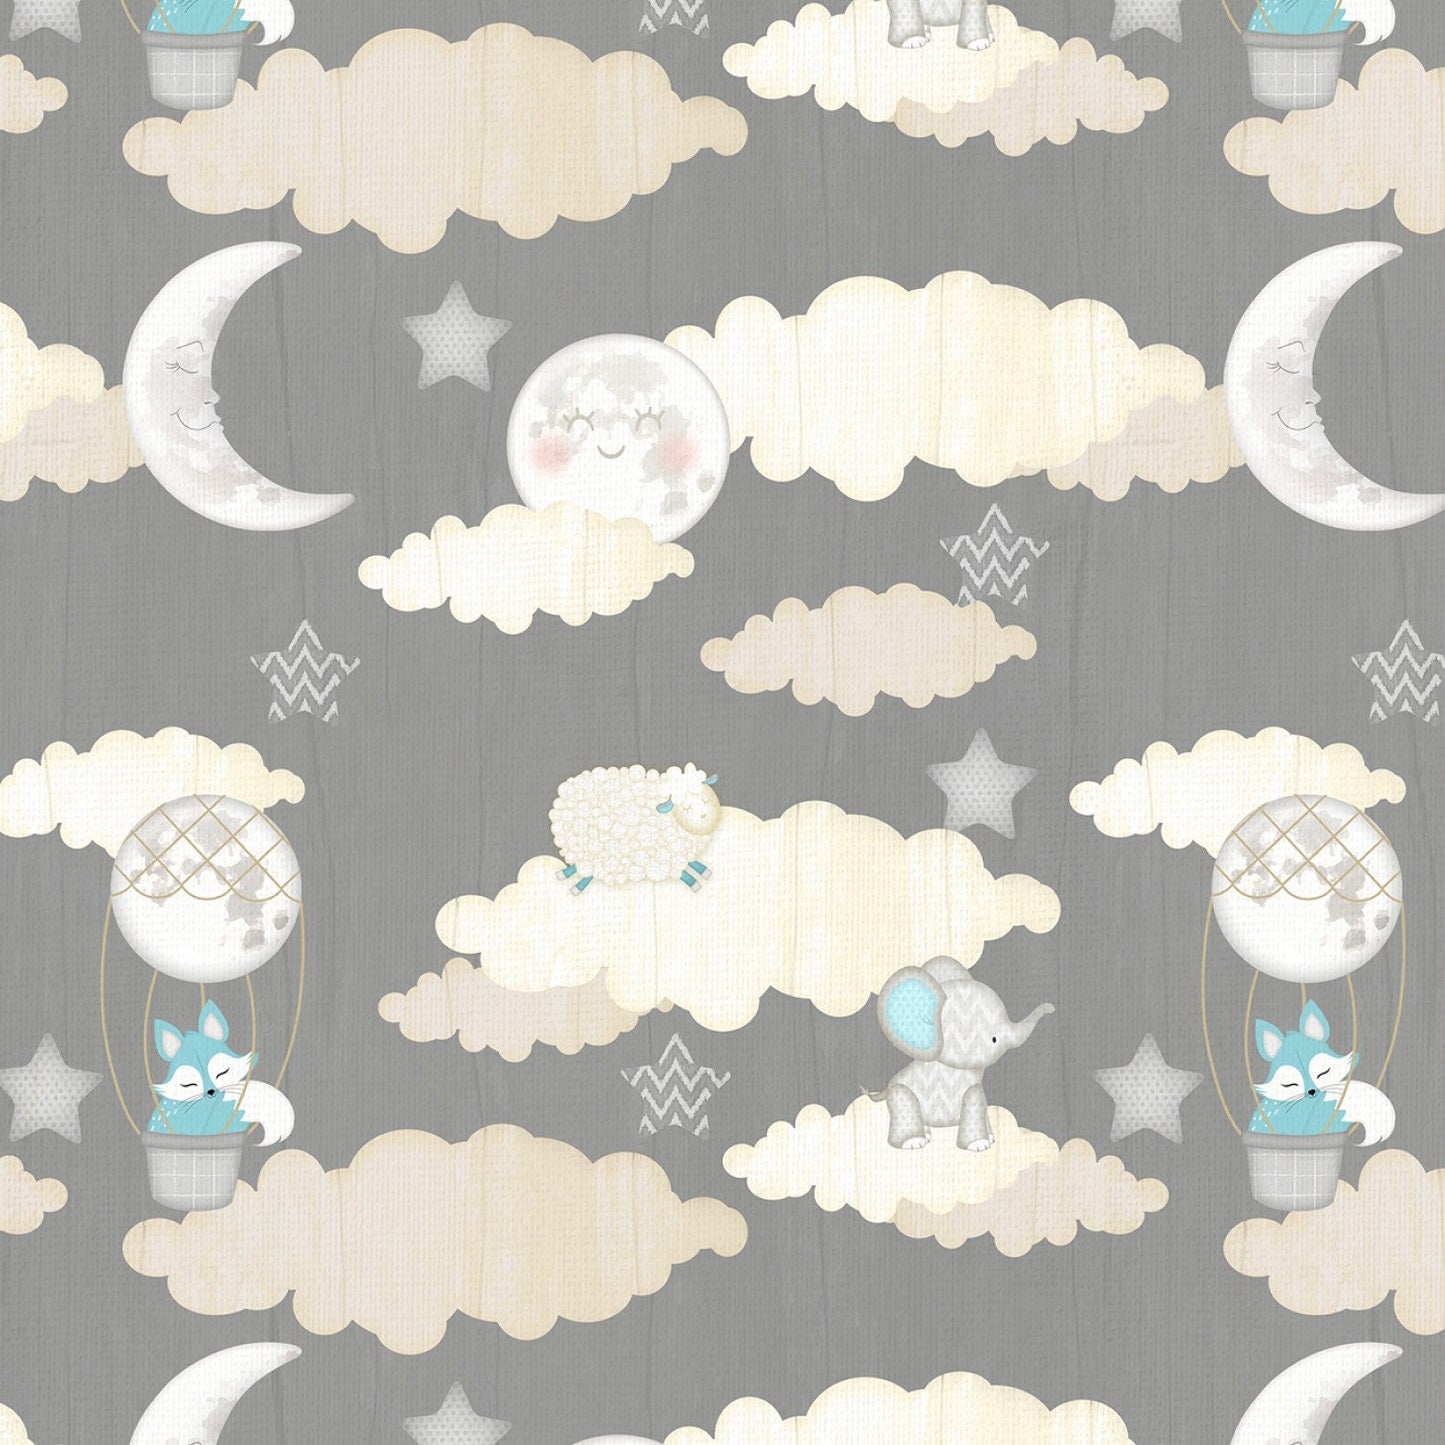 All Our Stars by Jennifer Pugh Light Grey Scenic 82579-919 Cotton Woven Fabric